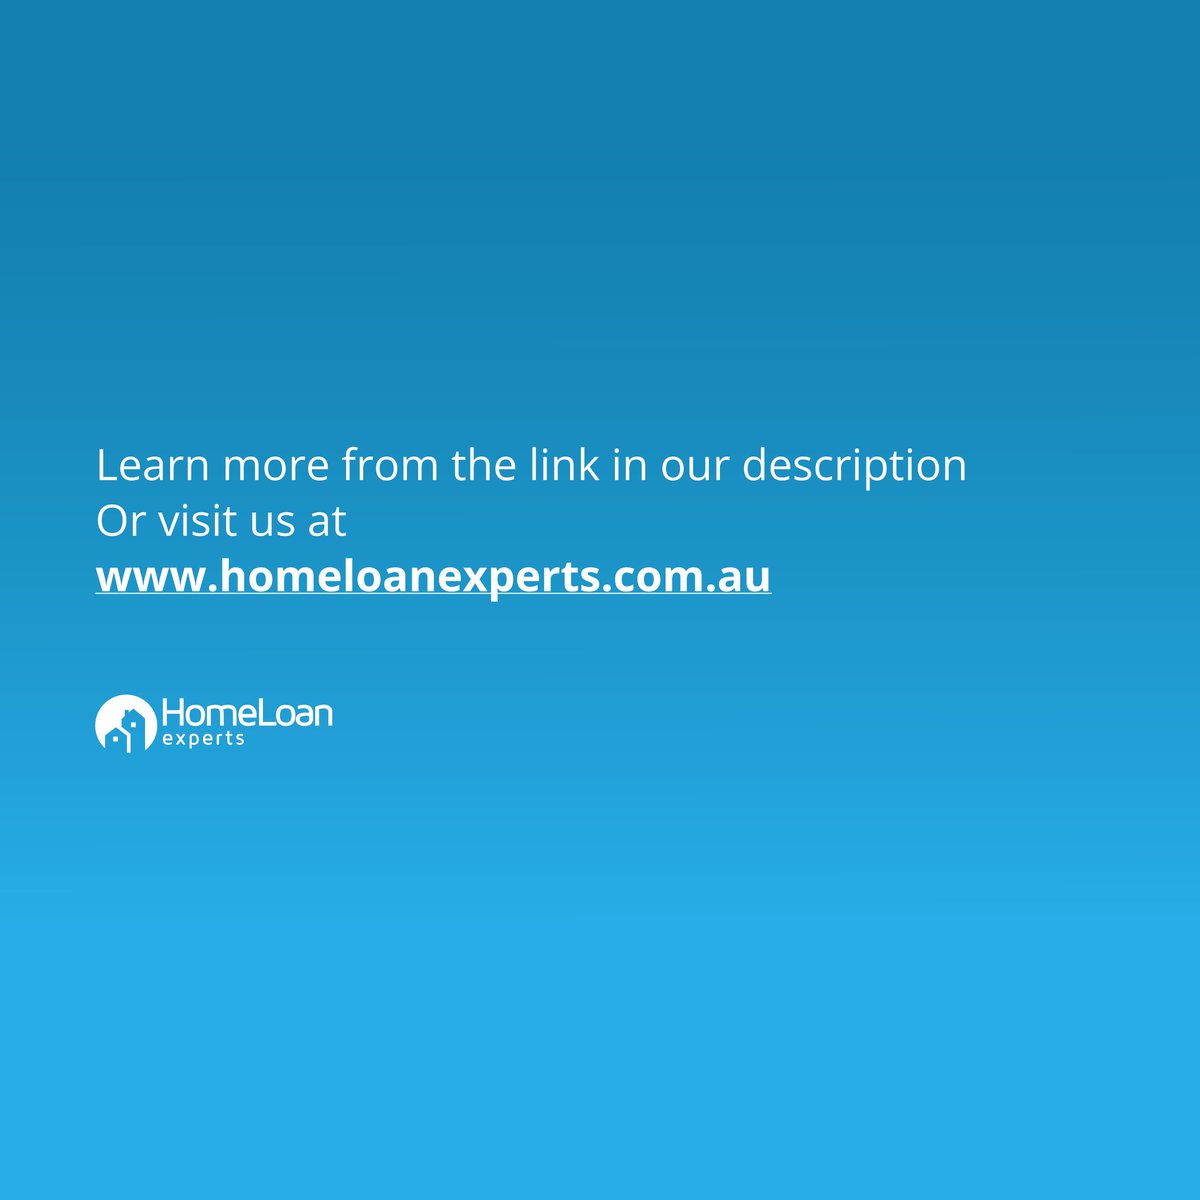 HomeLoanExperts tweet picture